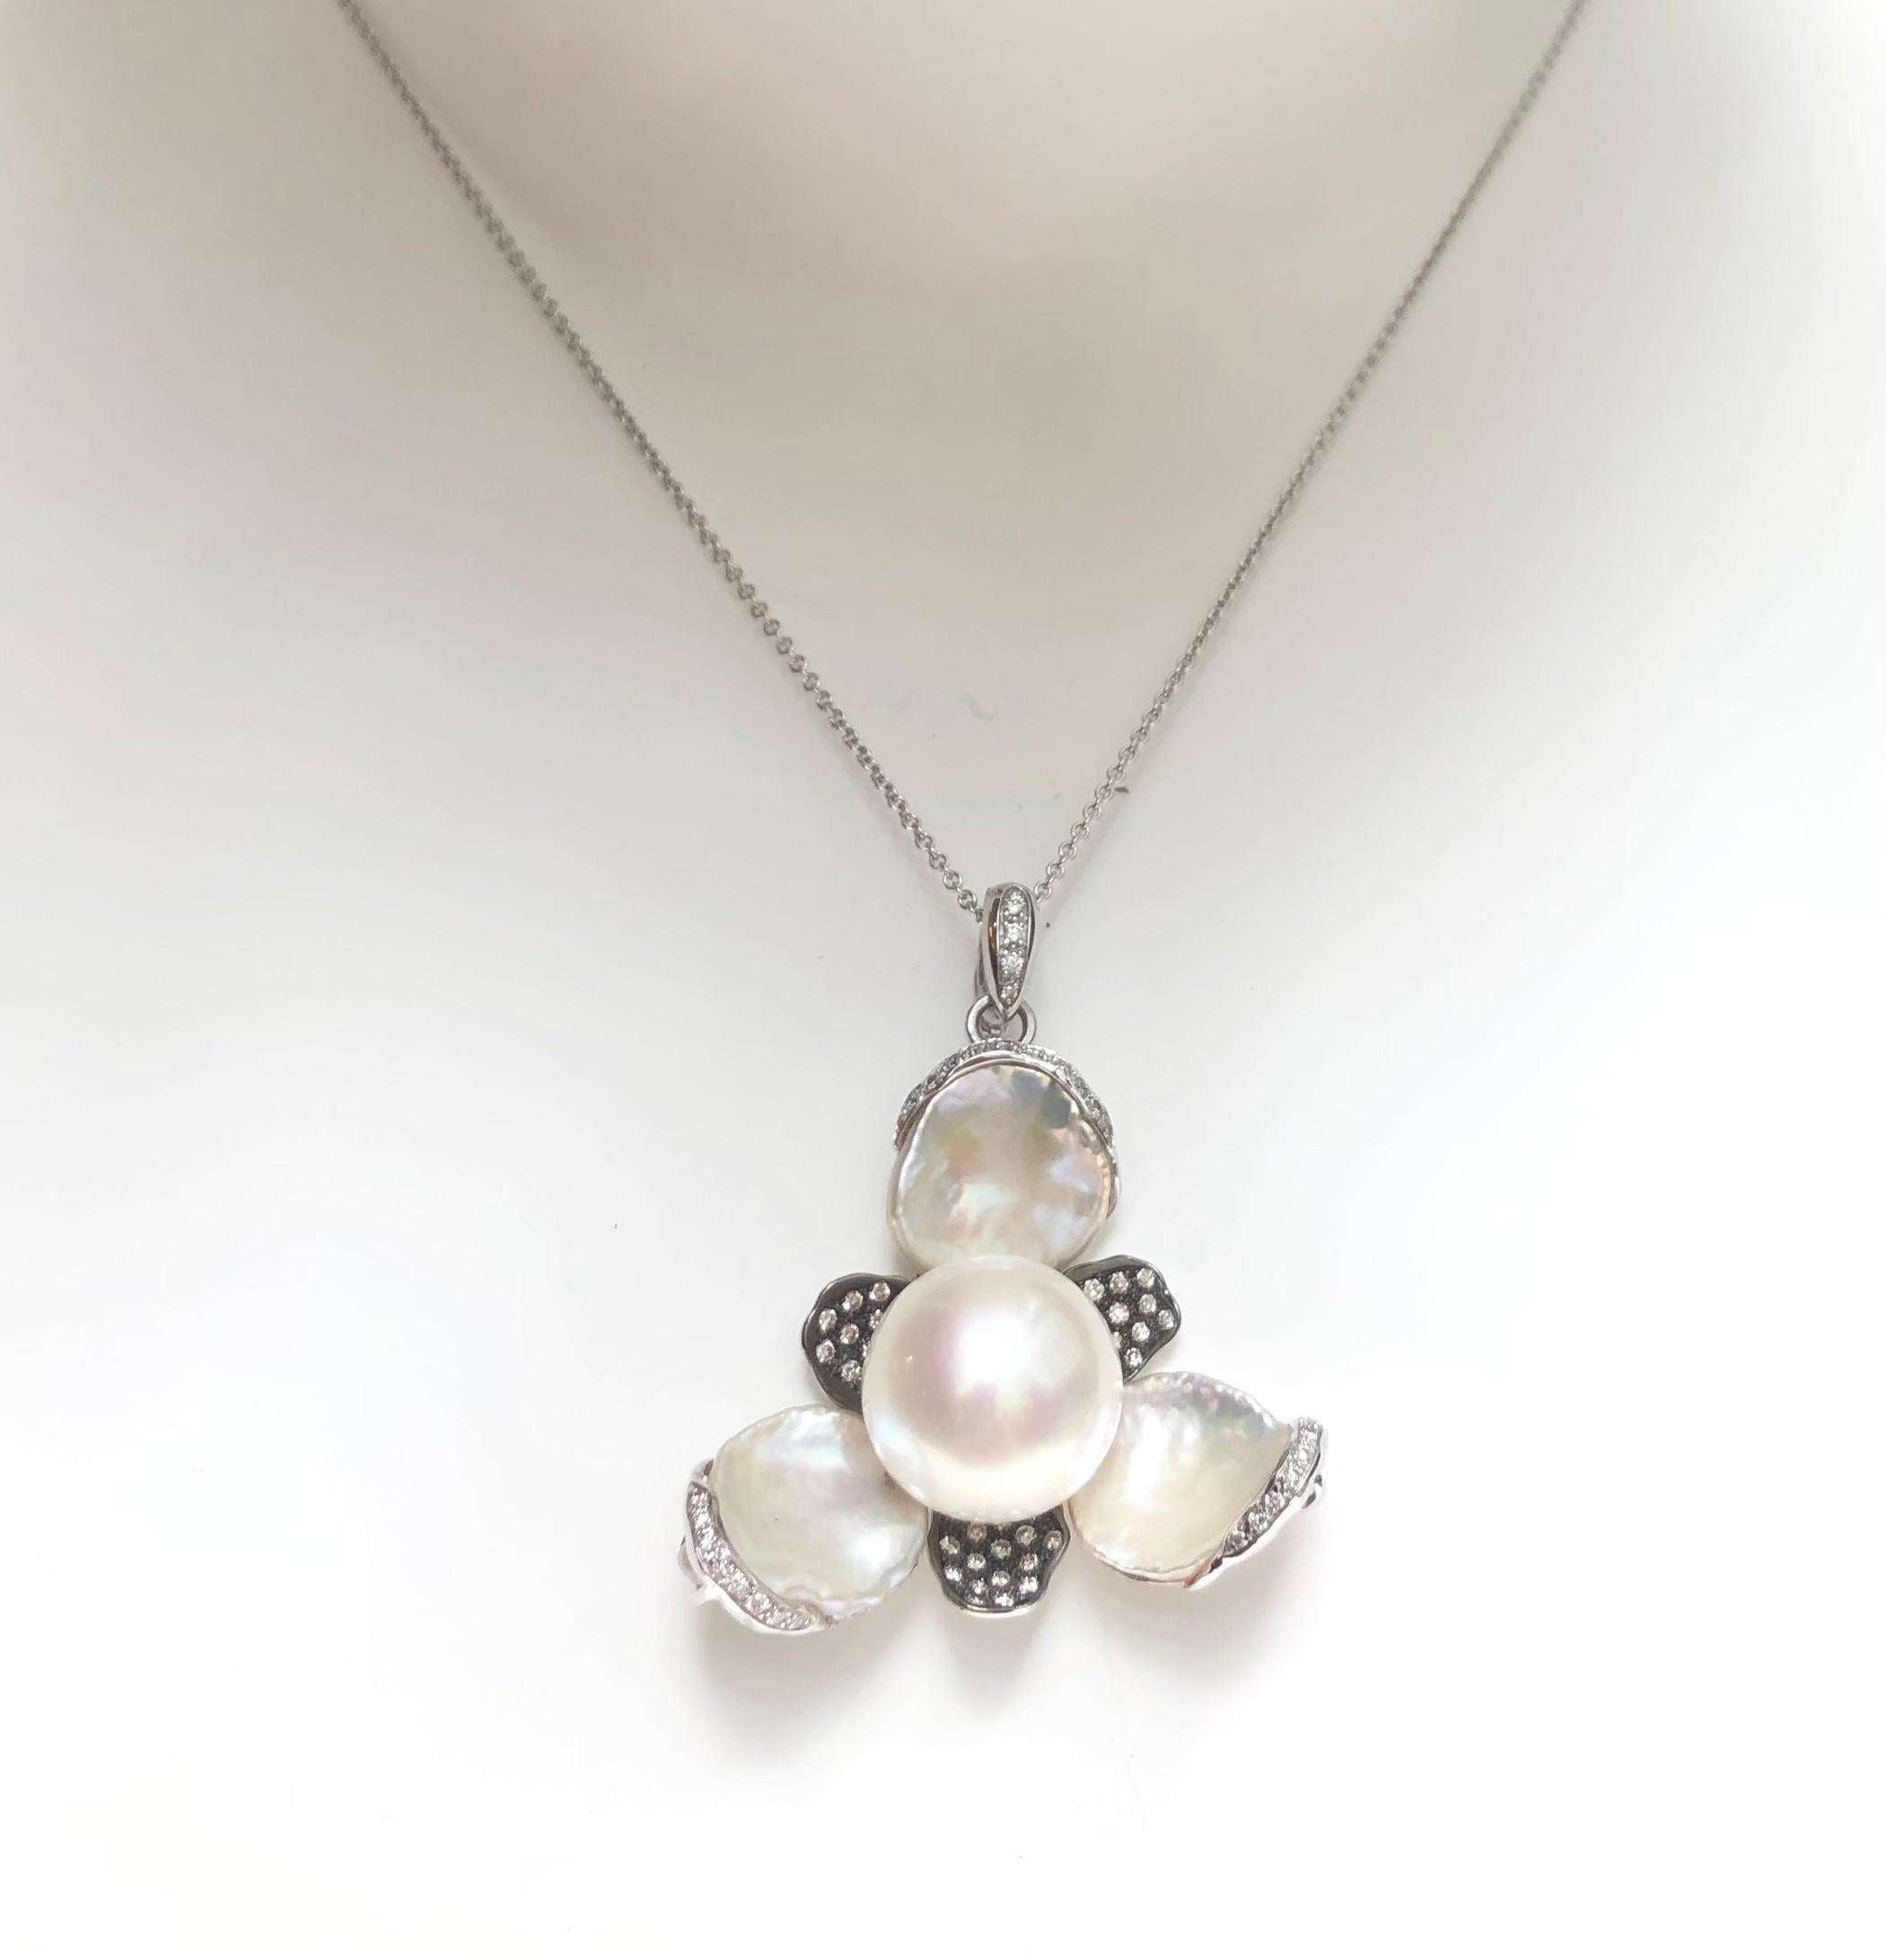 Fresh Water Pearl with Brown Diamond 0.63 carat Pendant set in 18 Karat White Gold Settings
(chain not included)

Width:  3.8 cm 
Length: 4.2 cm
Total Weight: 13.03 grams

